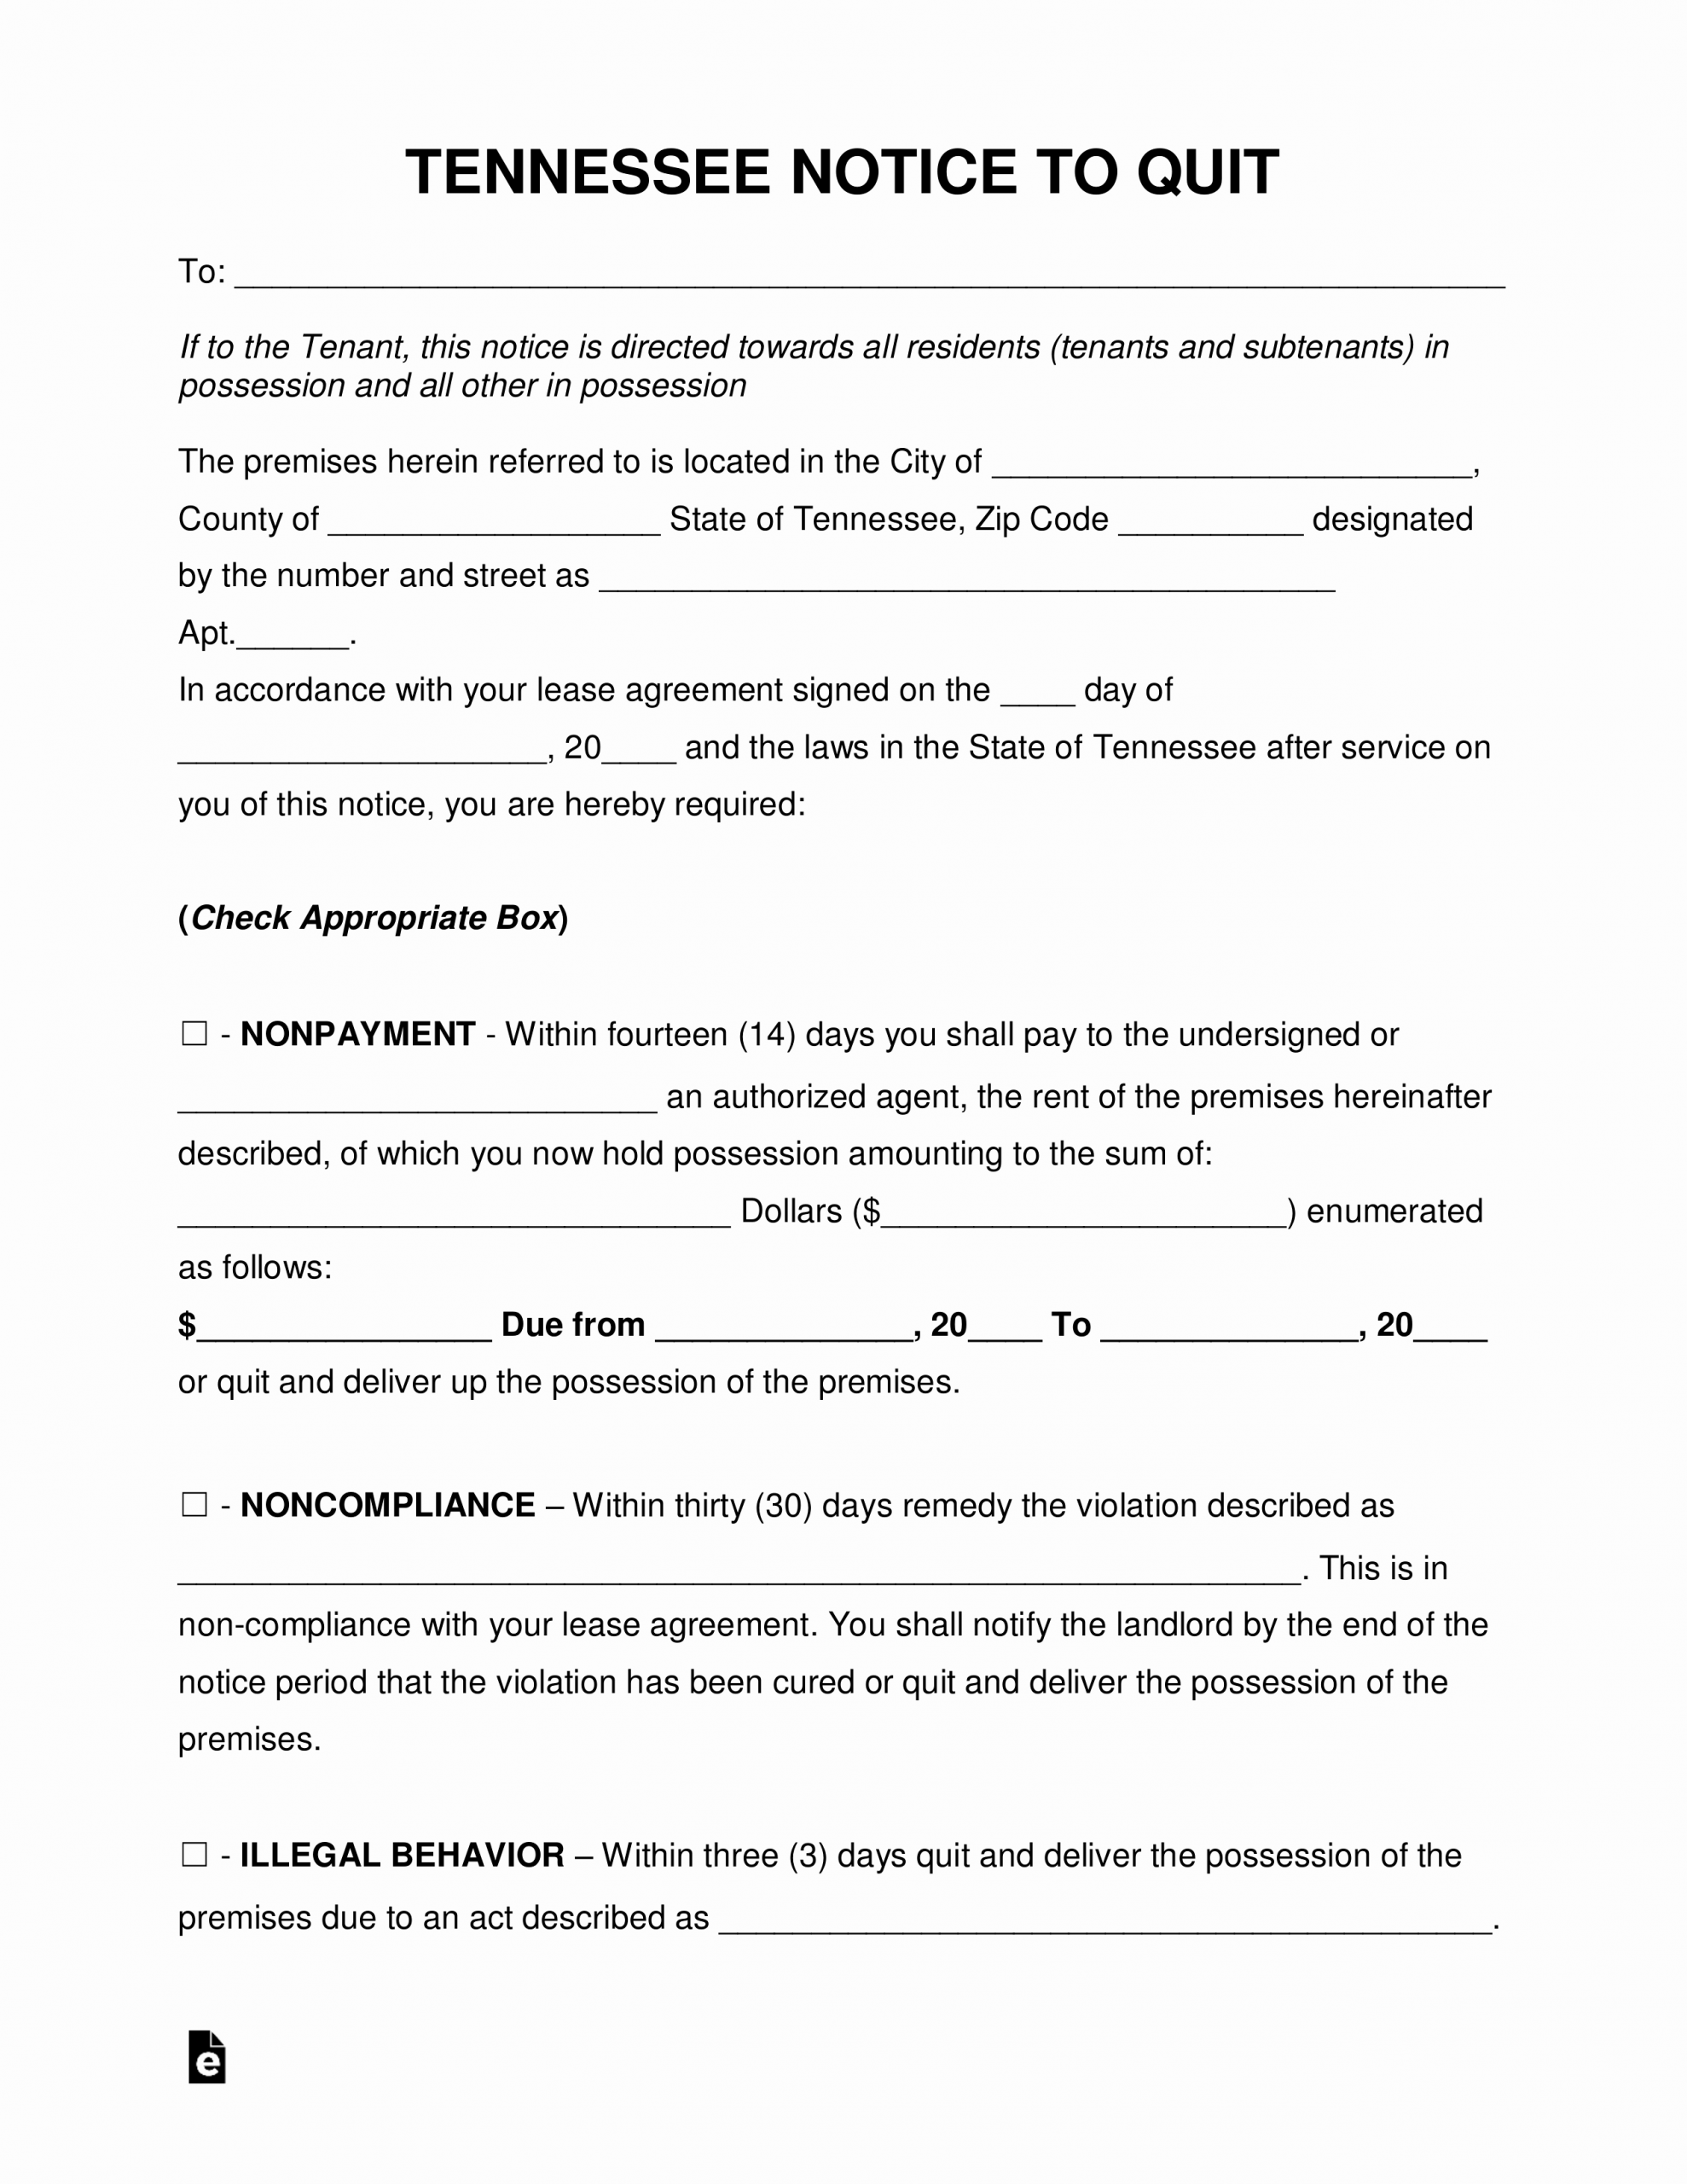 Free Eviction Notice Template Texas Unique Free Tennessee Eviction Notice forms